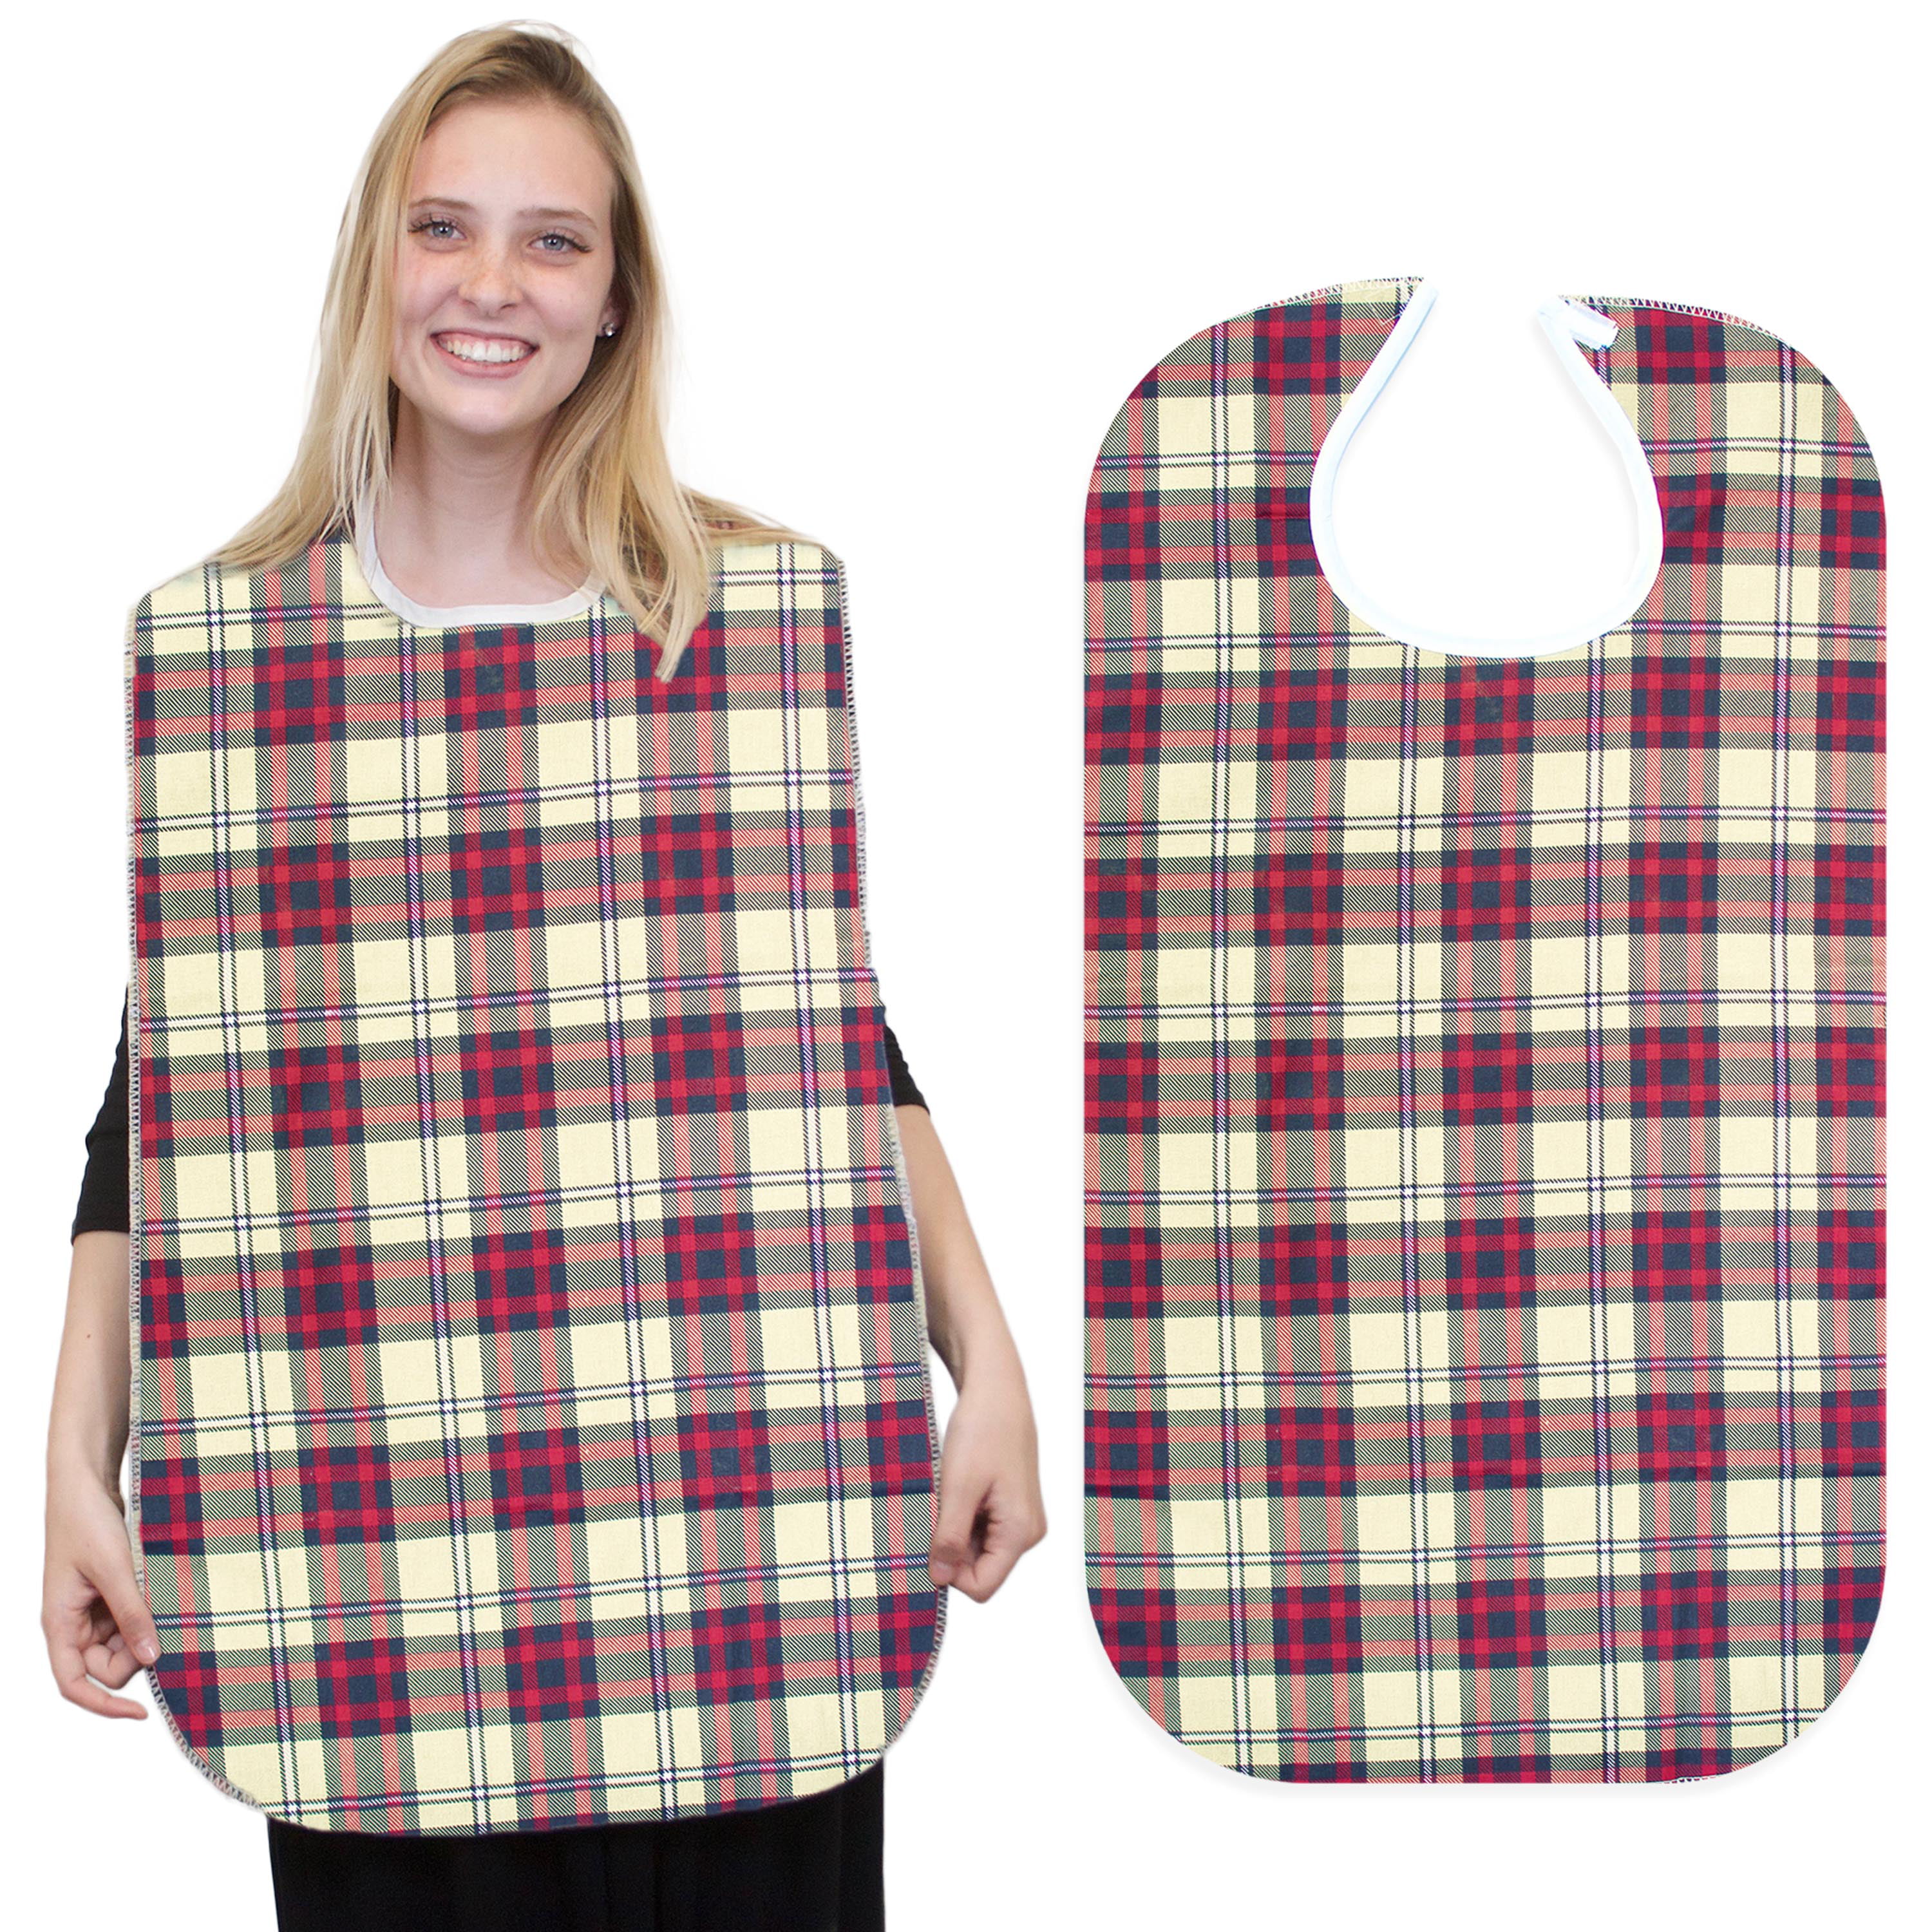 Adult bib and clothing protector pattern